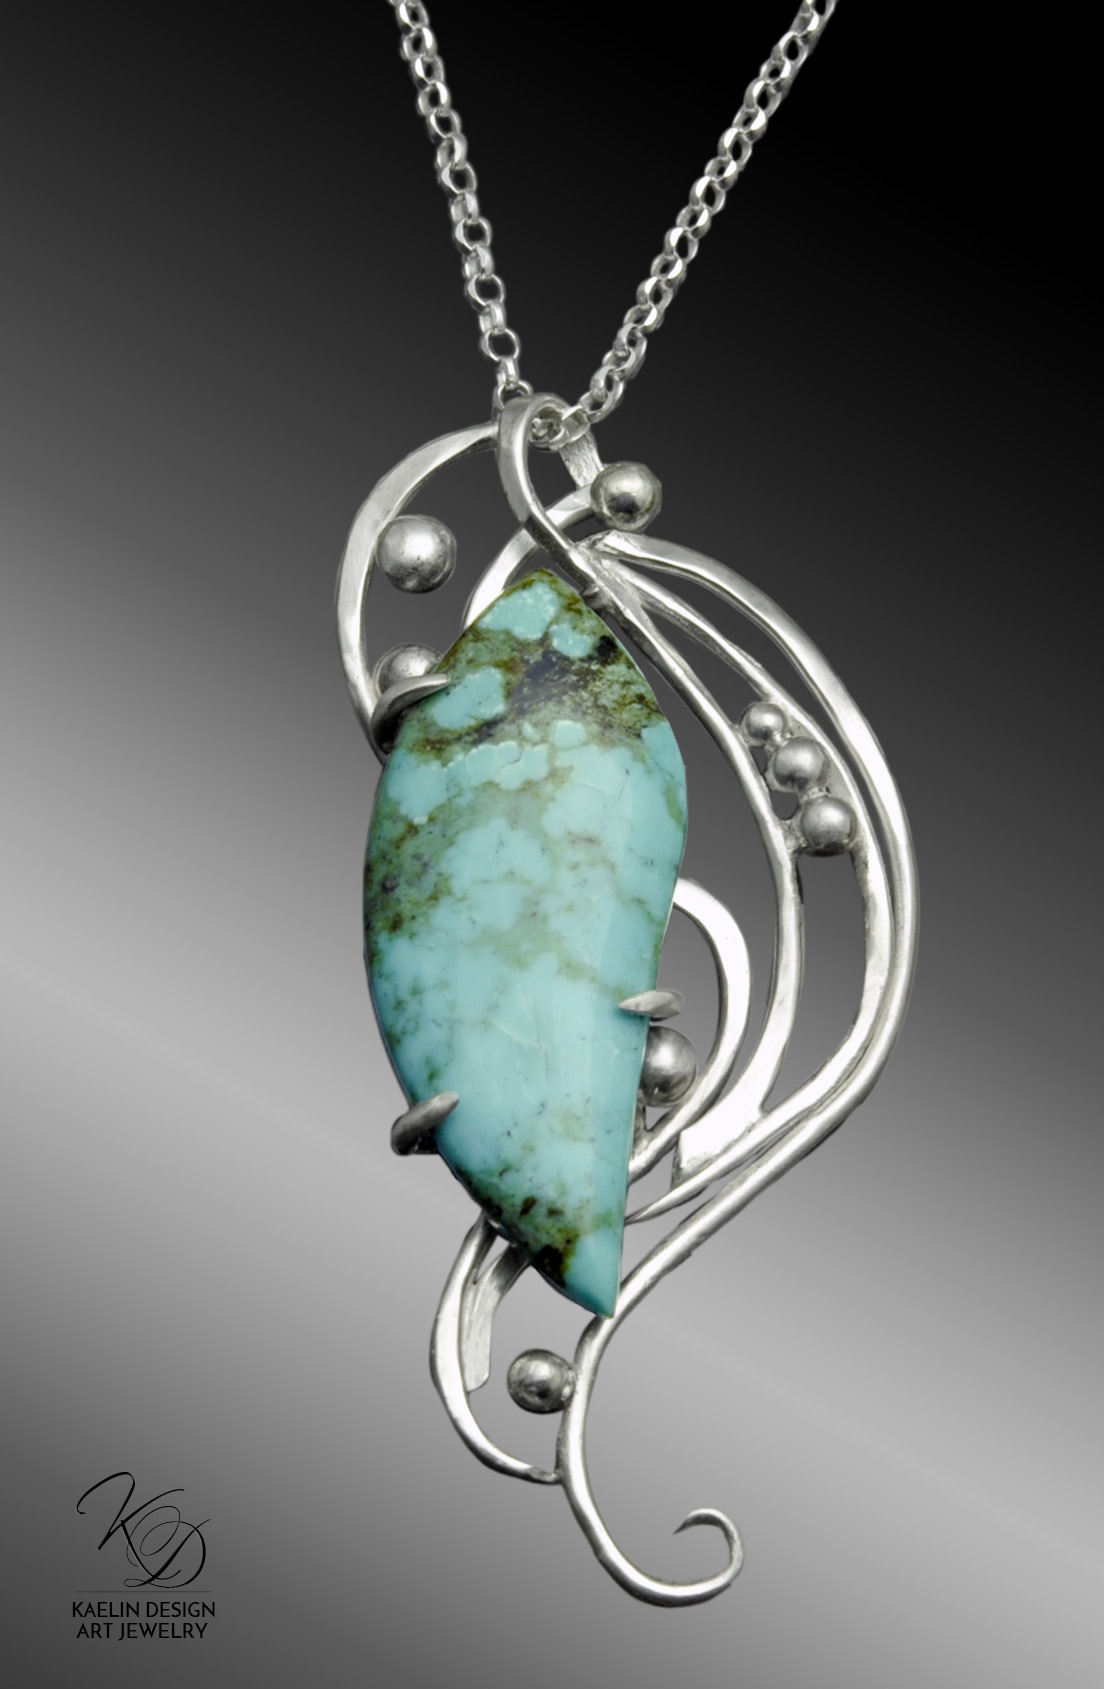 Turbulent Waters Turquoise and Hand Forged Silver Art Jewelry Pendant by Kaelin Design